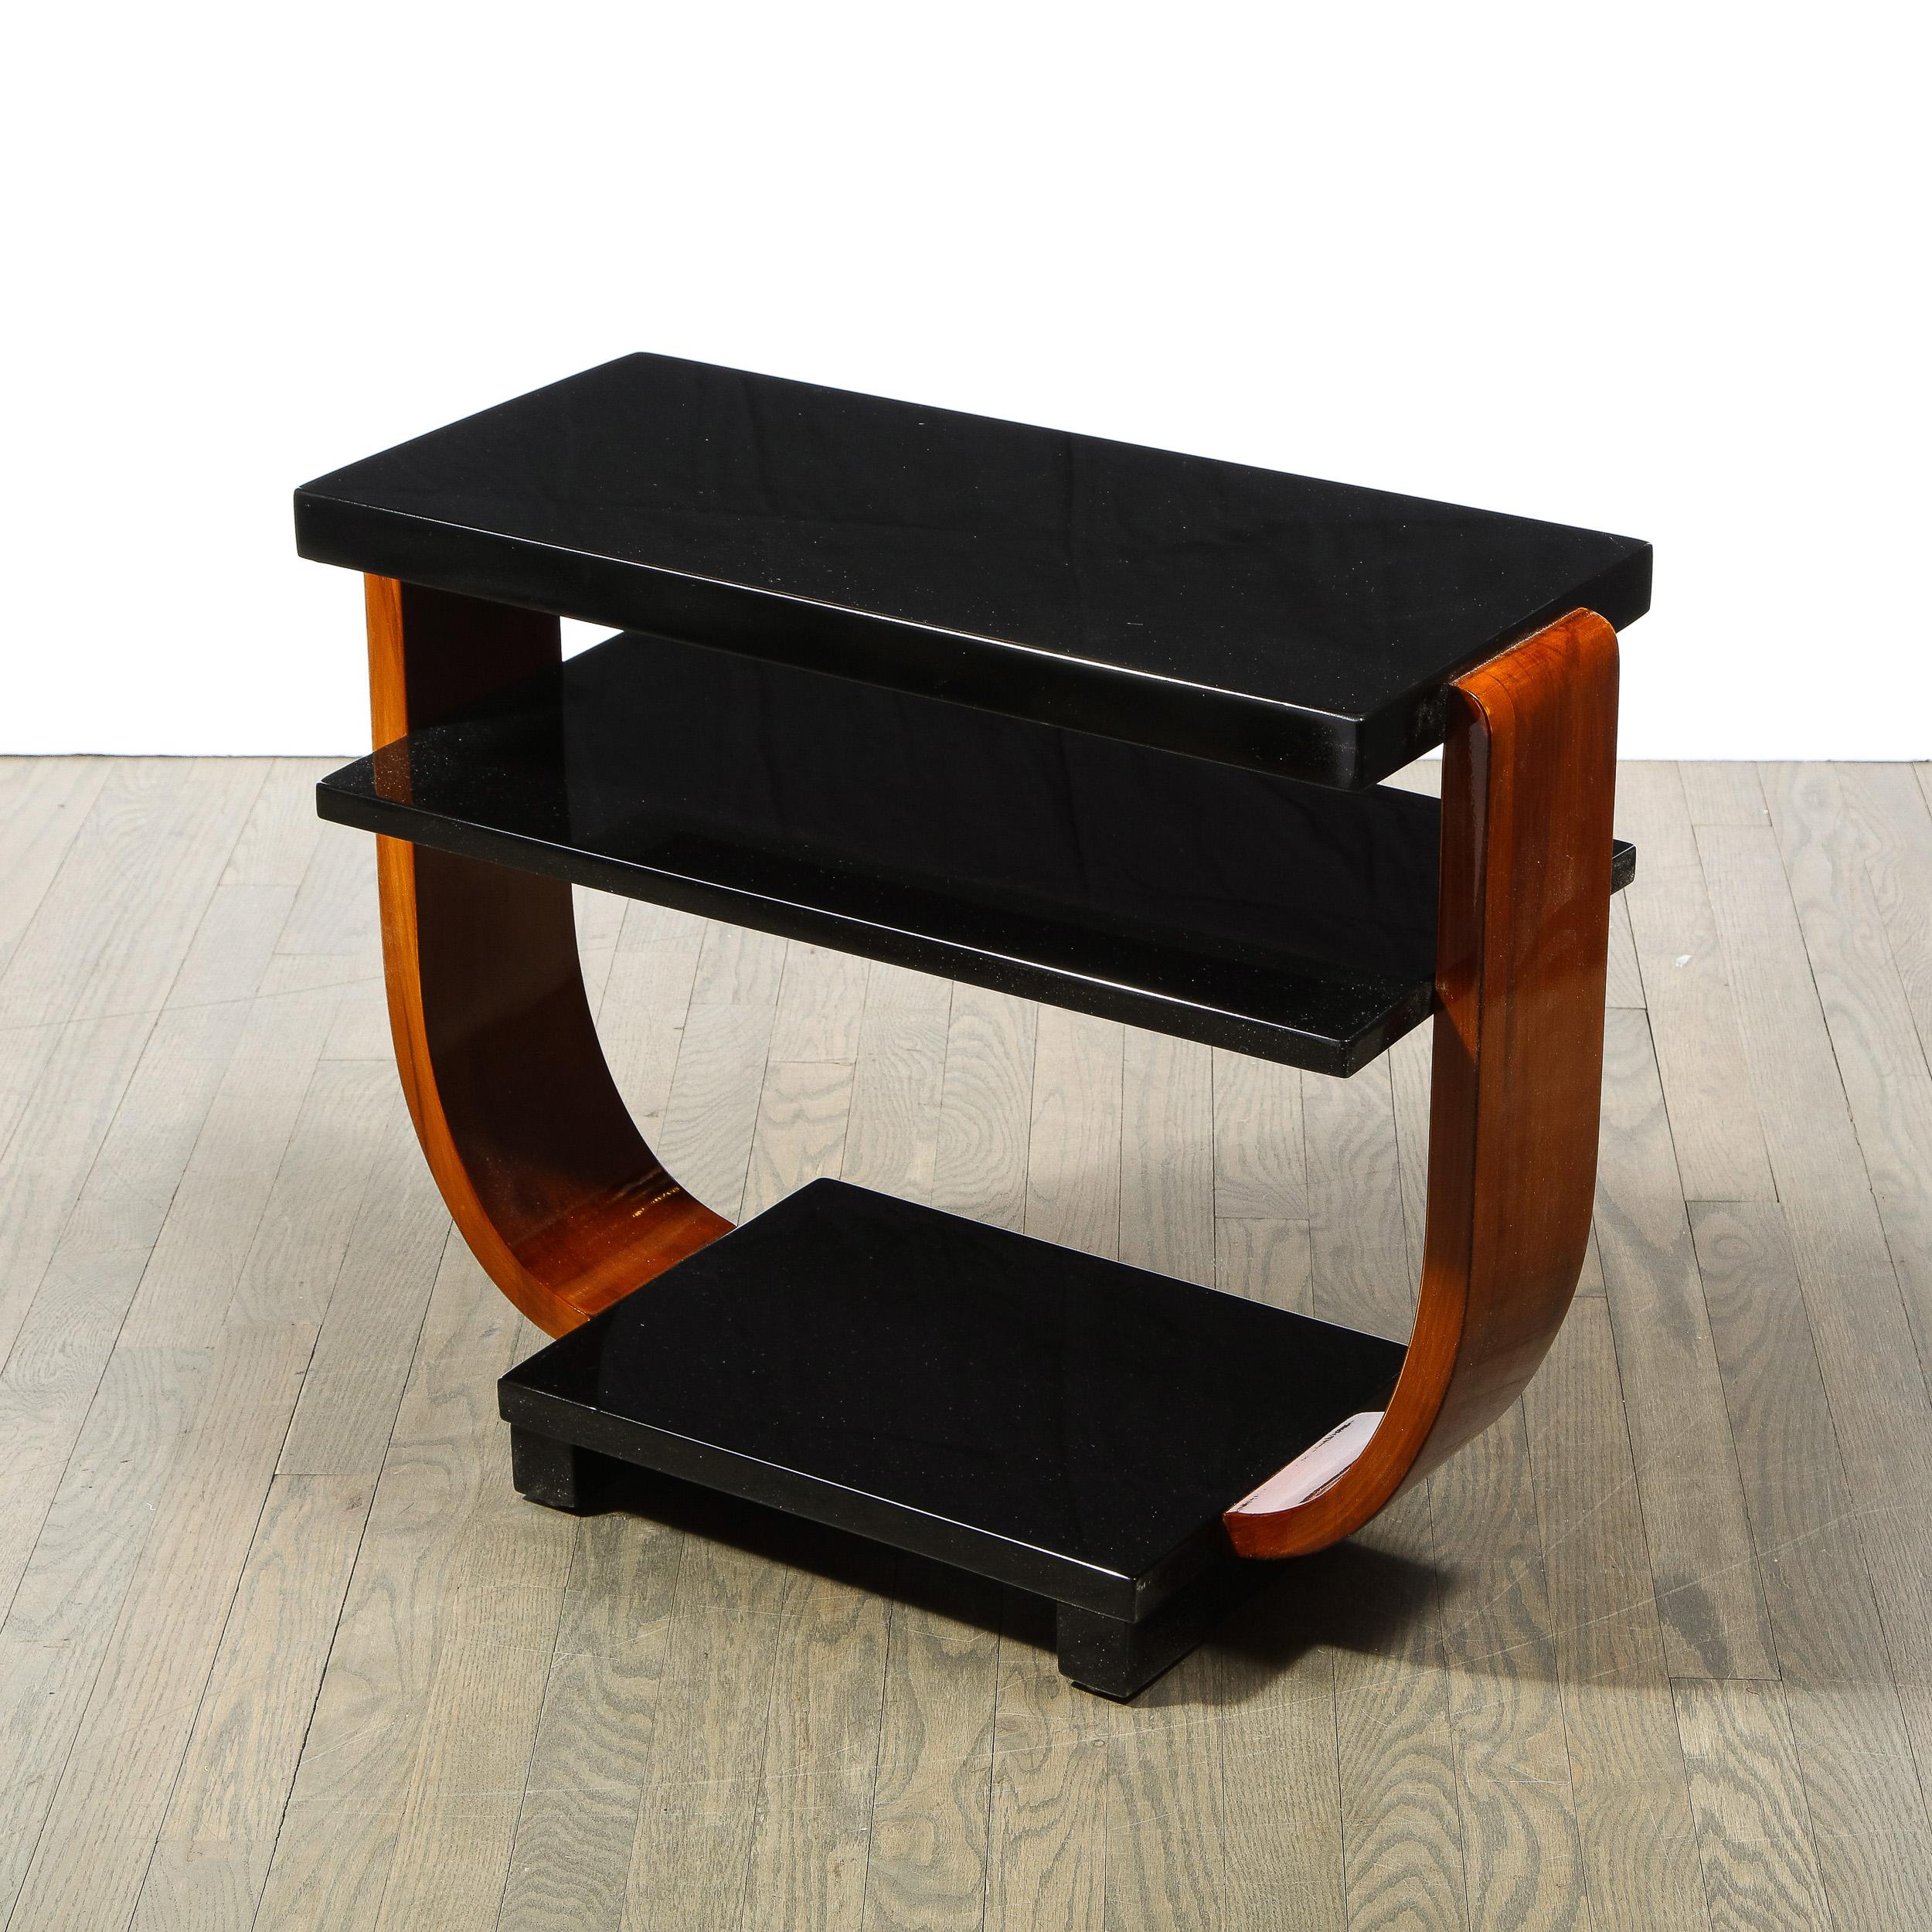 Lacquered 1930s Streamline Art Deco Walnut and Black Lacquer Two Tier Side Tables